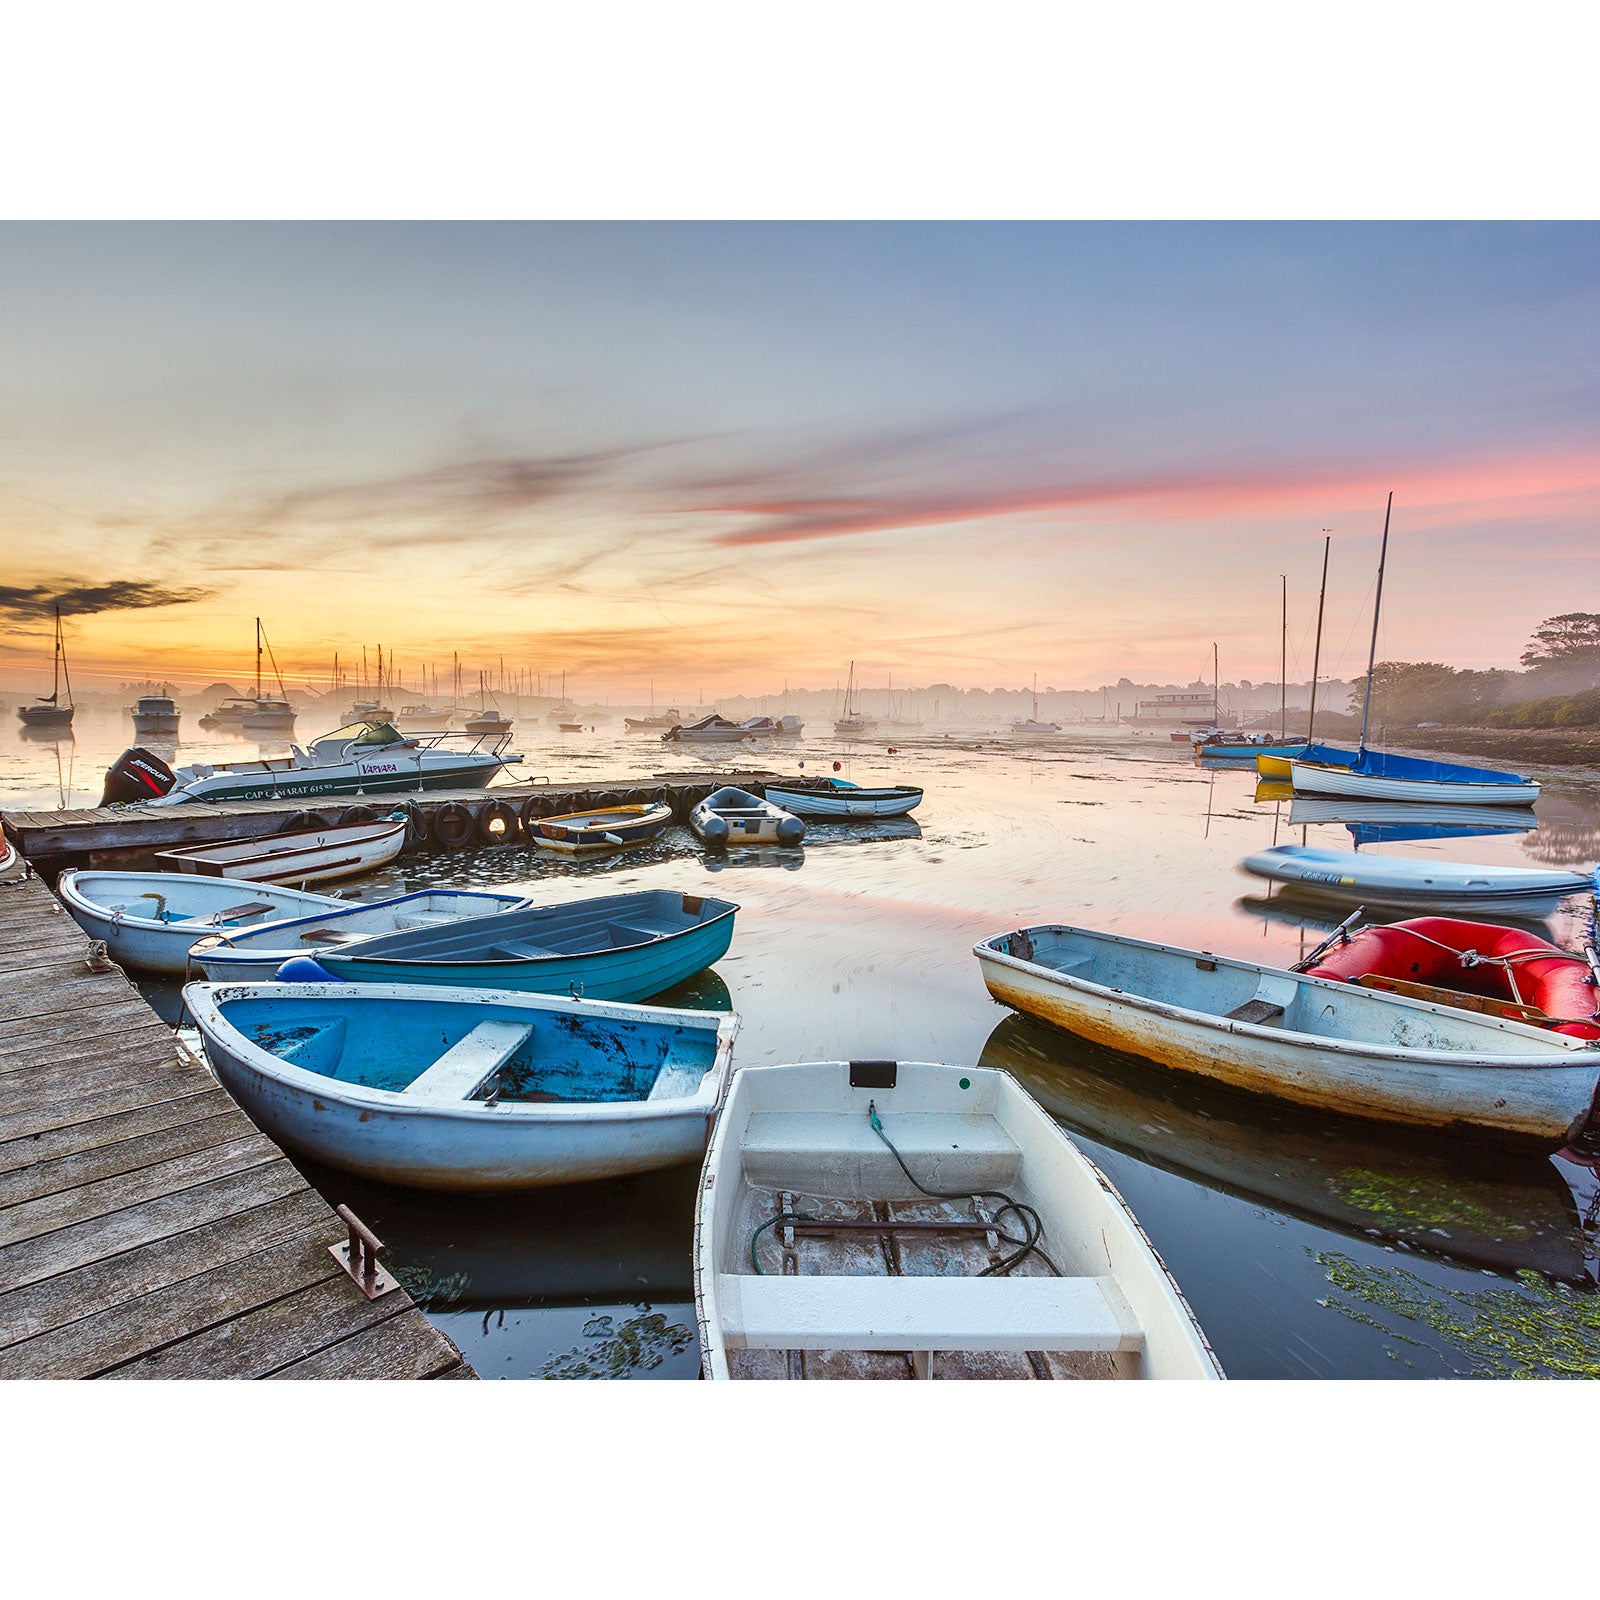 Boats moored at Bembridge Harbour on the Isle of Wight during a colorful sunrise, captured by Available Light Photography.